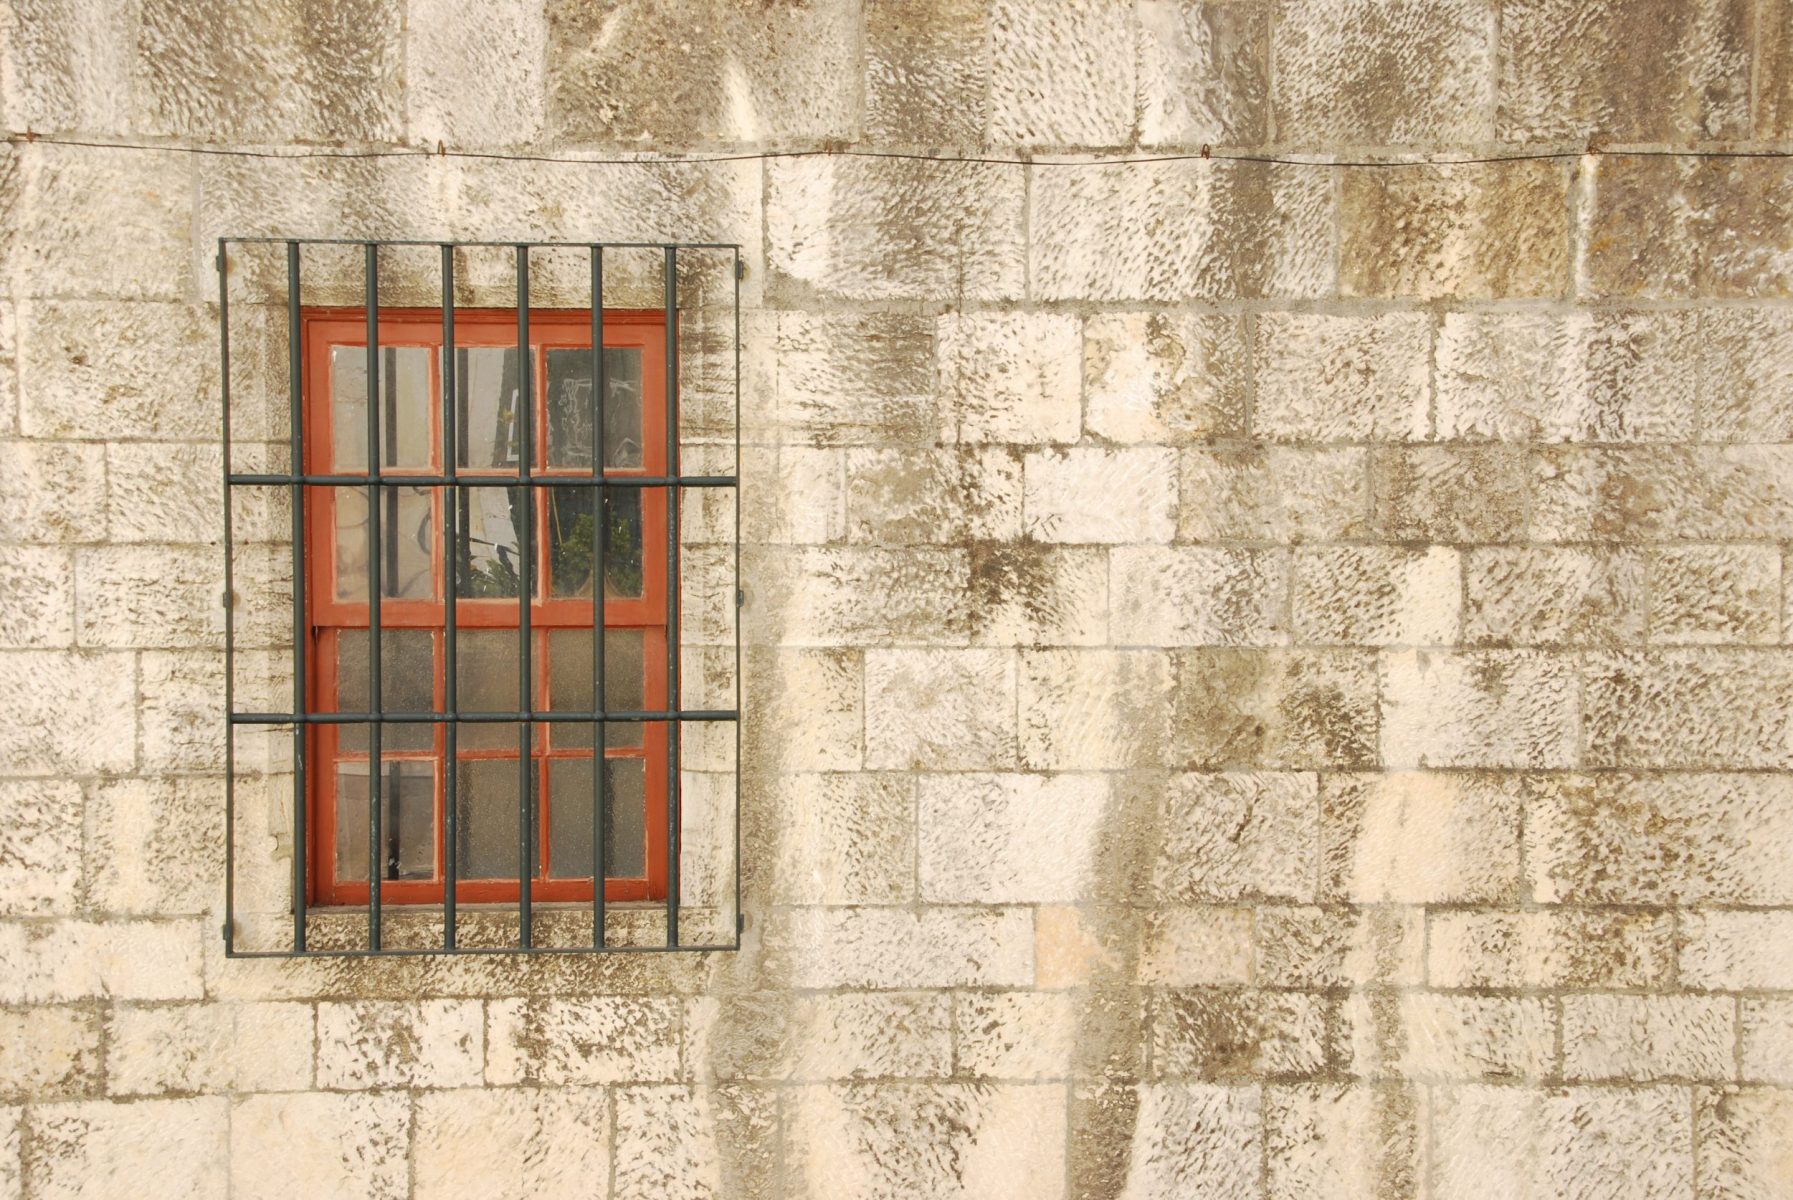 Window with bars of a medieval building